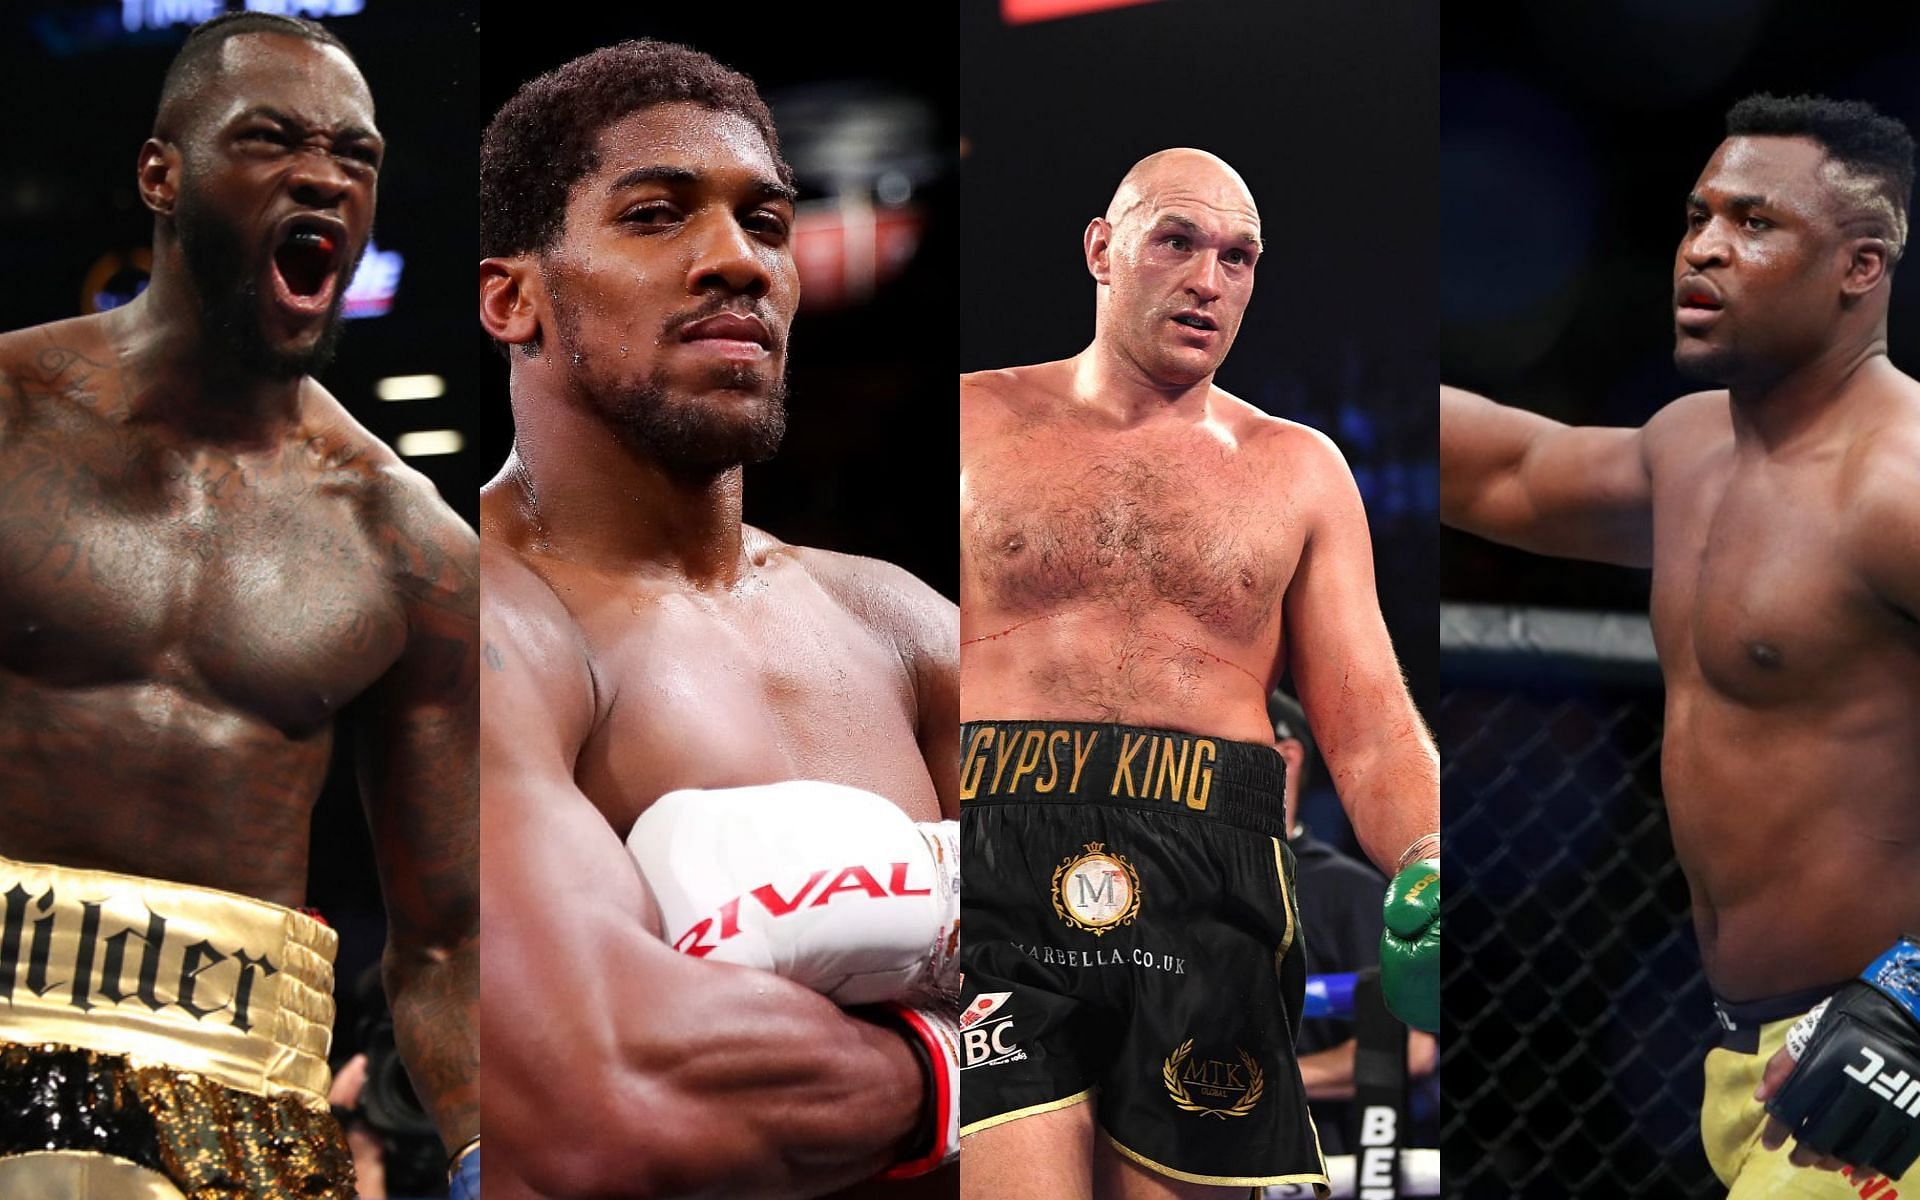 From left to right: Deontay Wilder, Anthony Joshua, Tyson Fury and Francis Ngannou